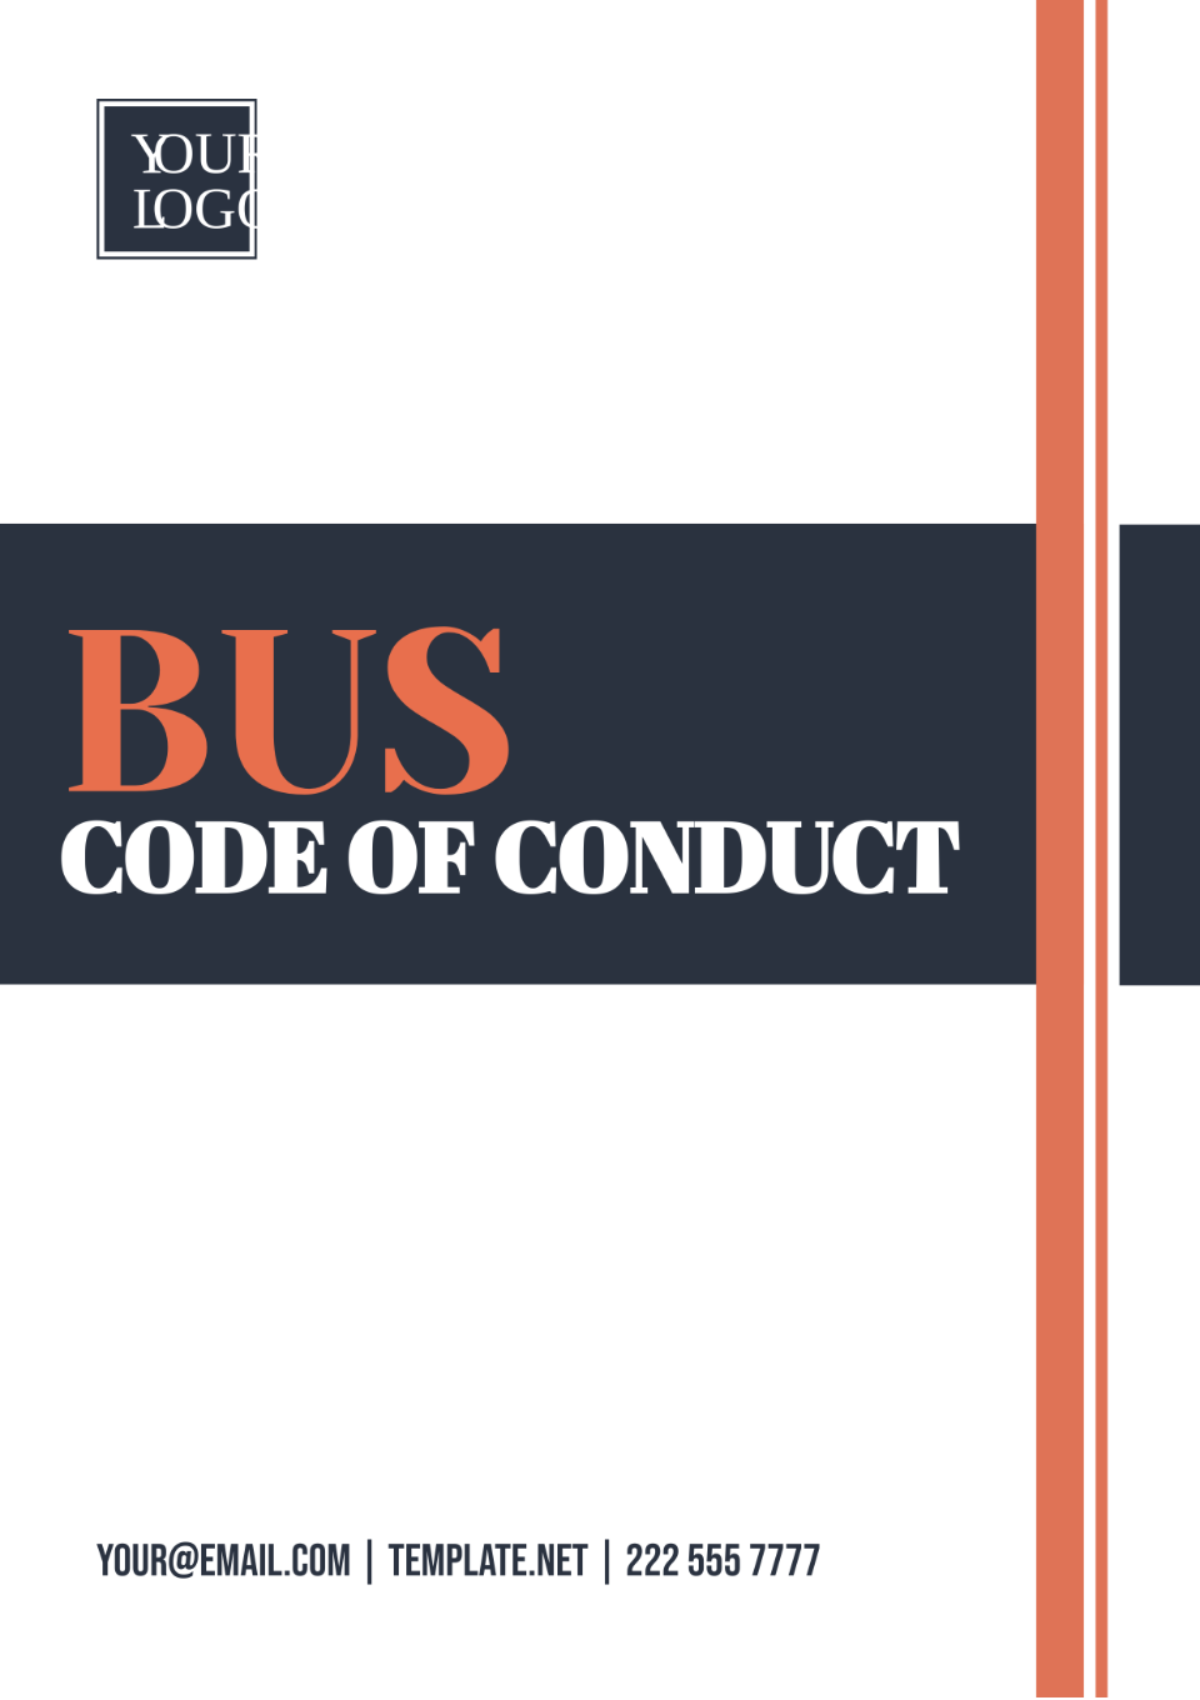 Bus Code of Conduct Template